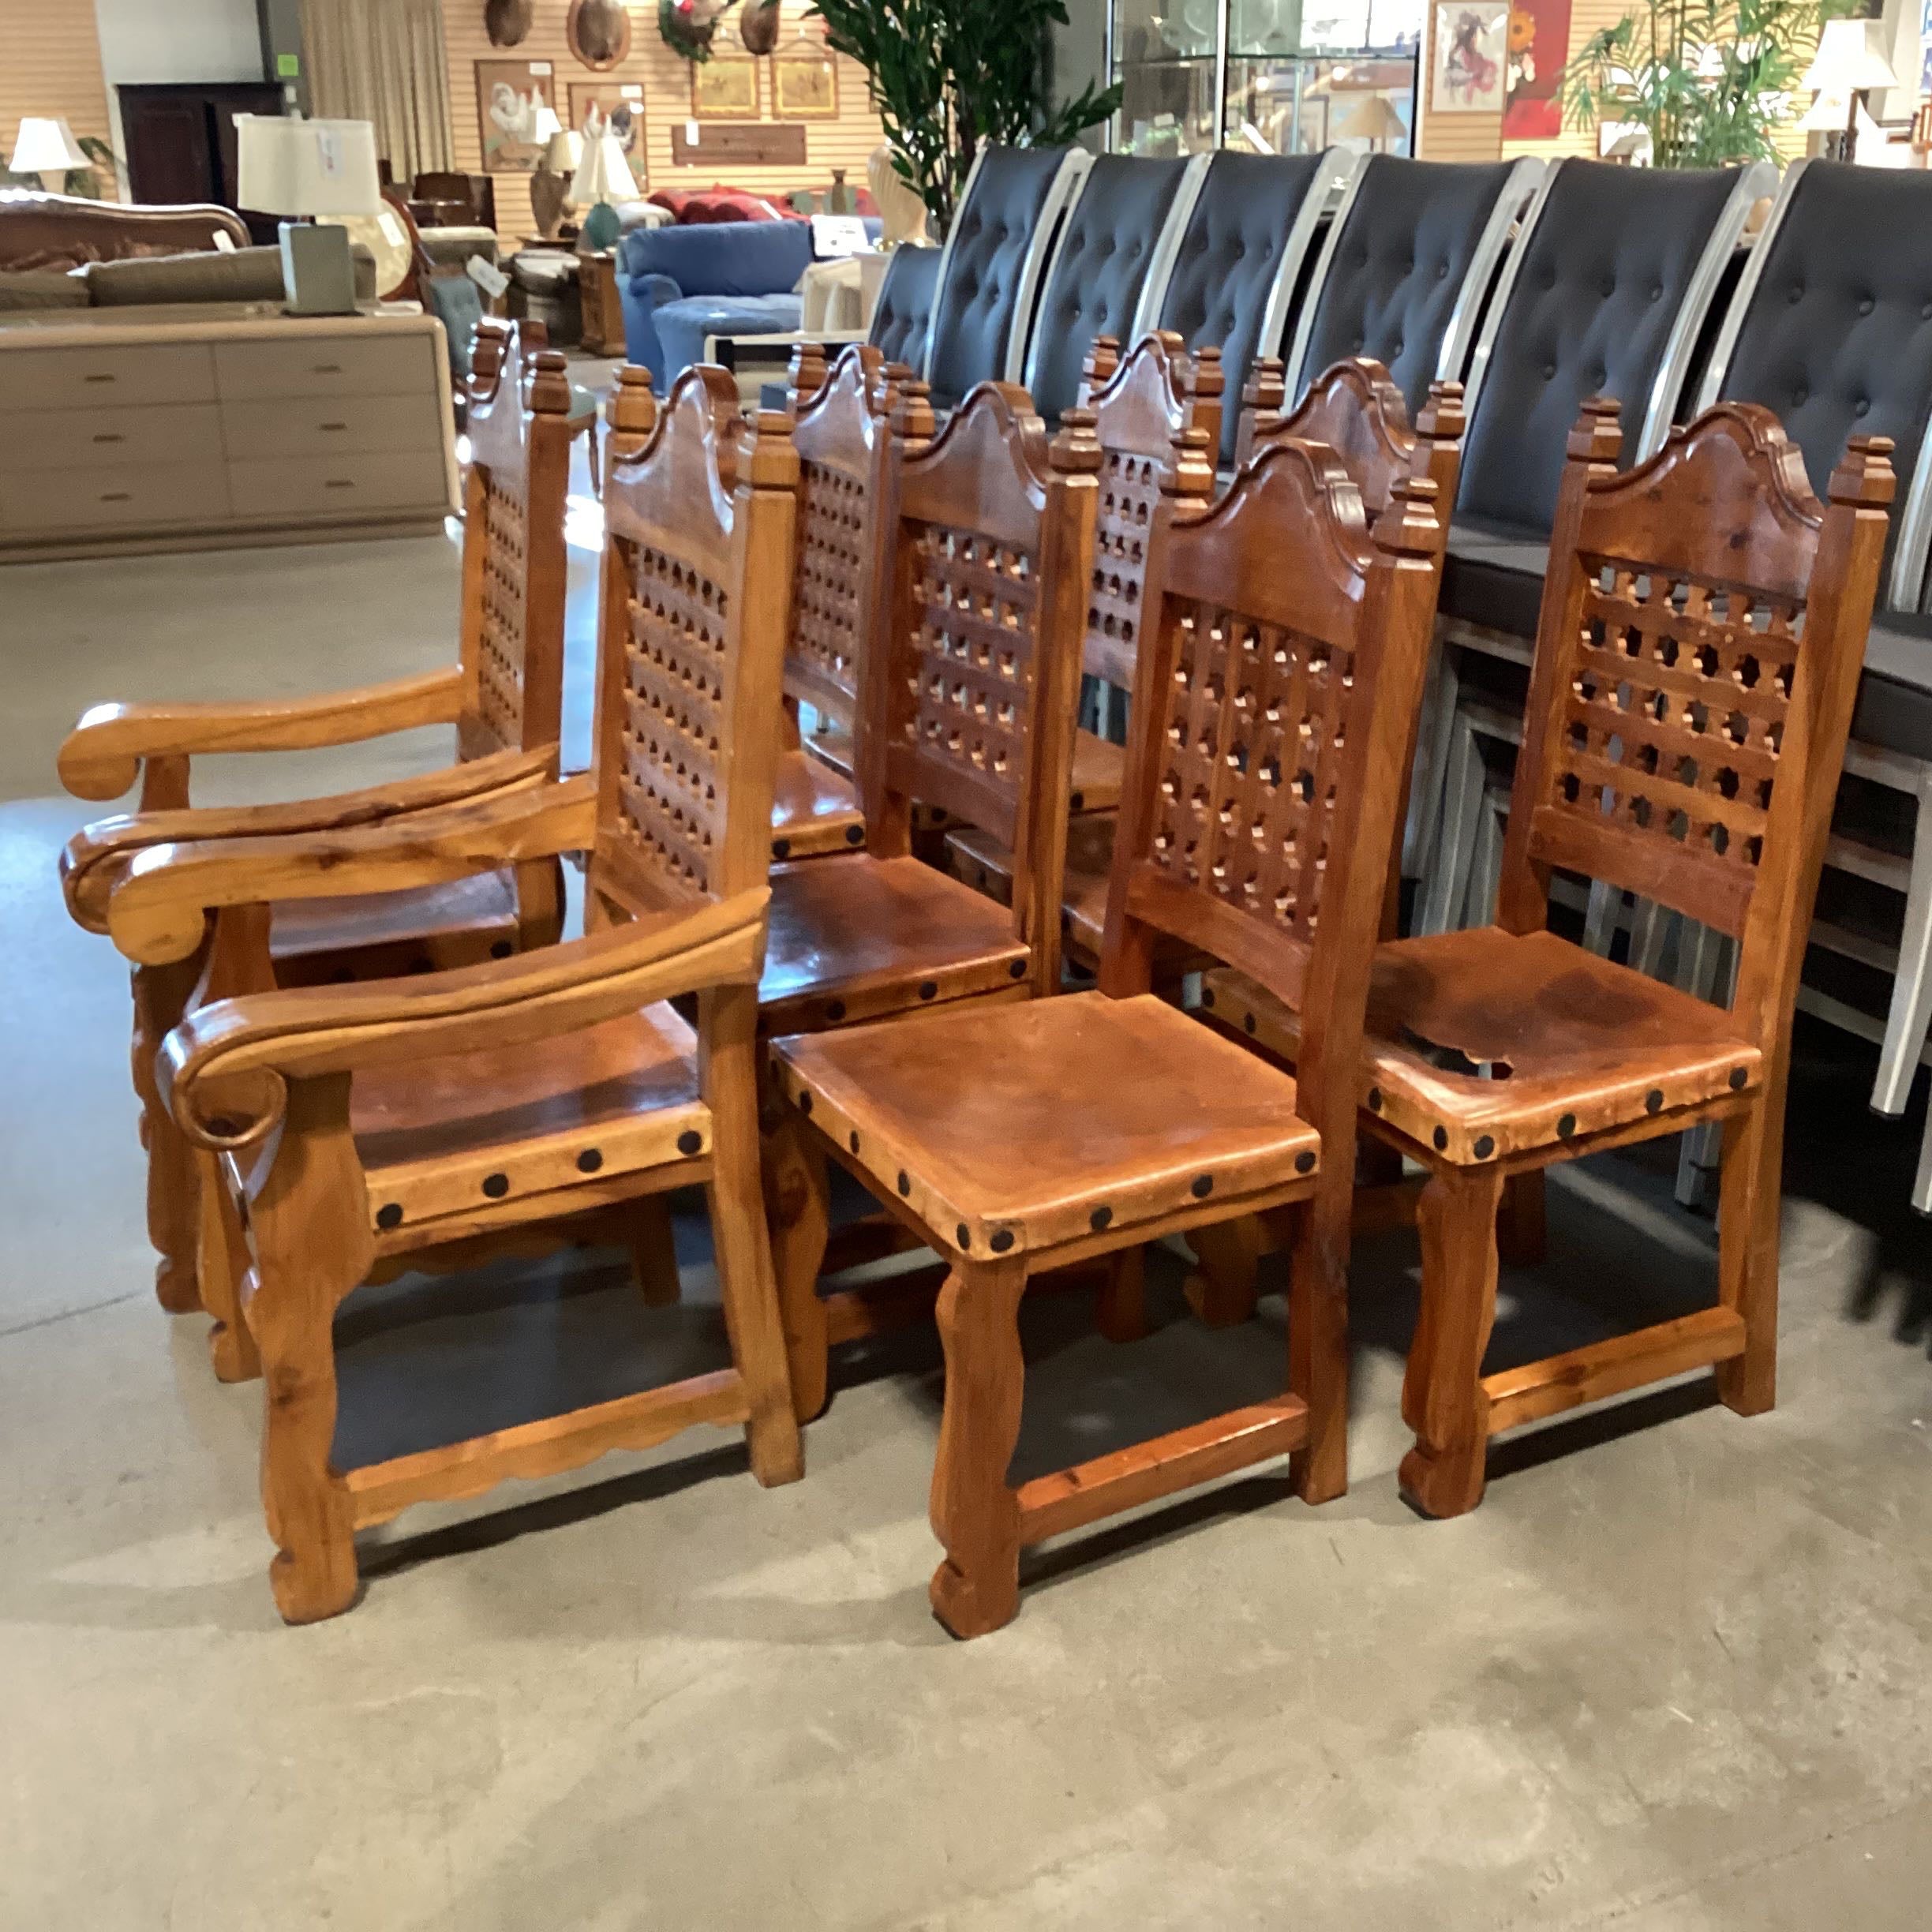 Set of 8 Ornate Carved Wood and Leather Nailhead Dining Chairs